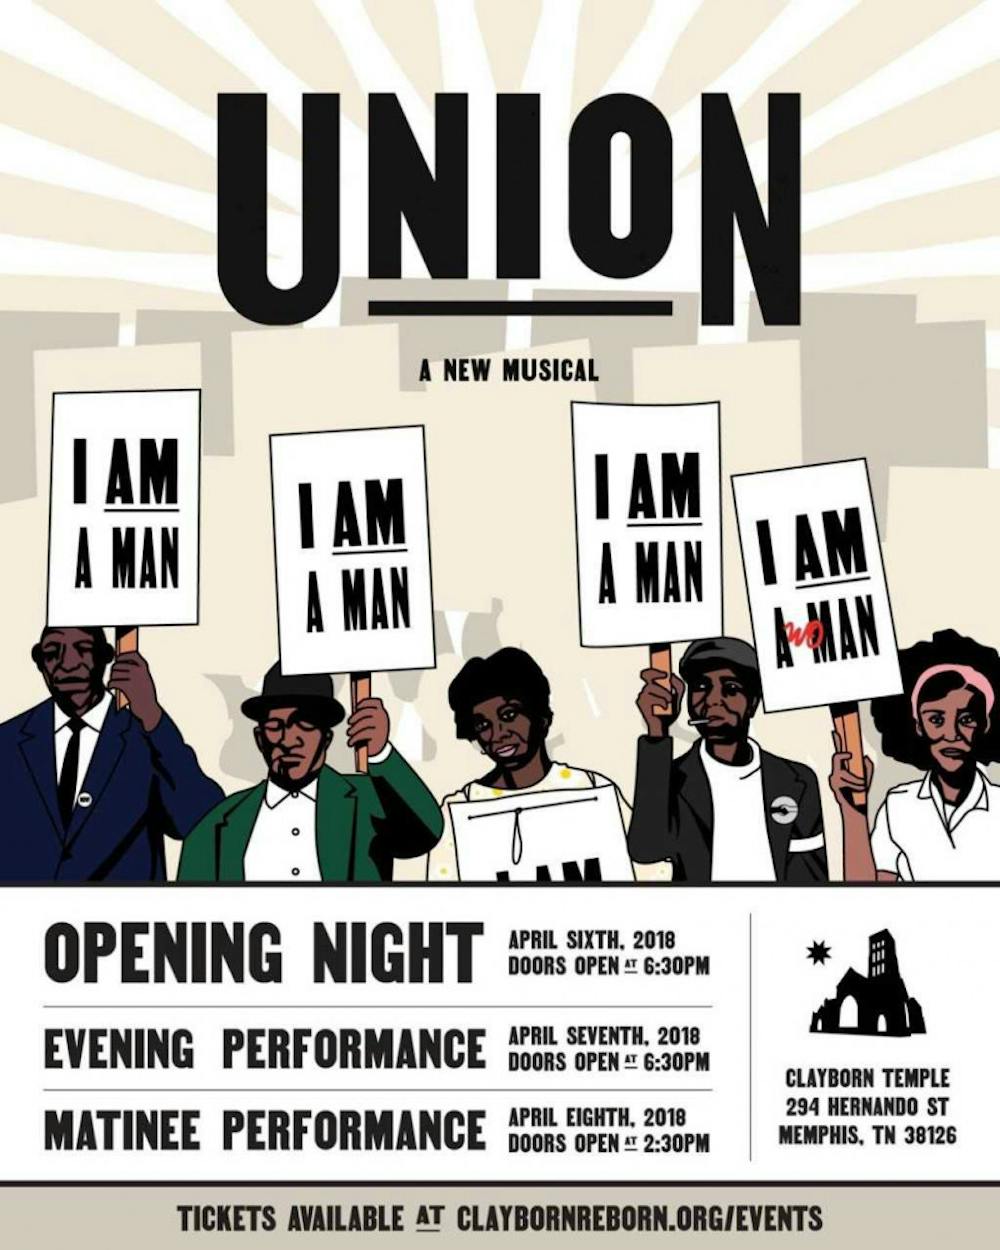 <p>A promotional flyer for "Union: A Musical" includes a drawing of participants holding iconic I AM A MAN posters during the Sanitation Strike. The flyers list the musical's schedule.&nbsp;</p>